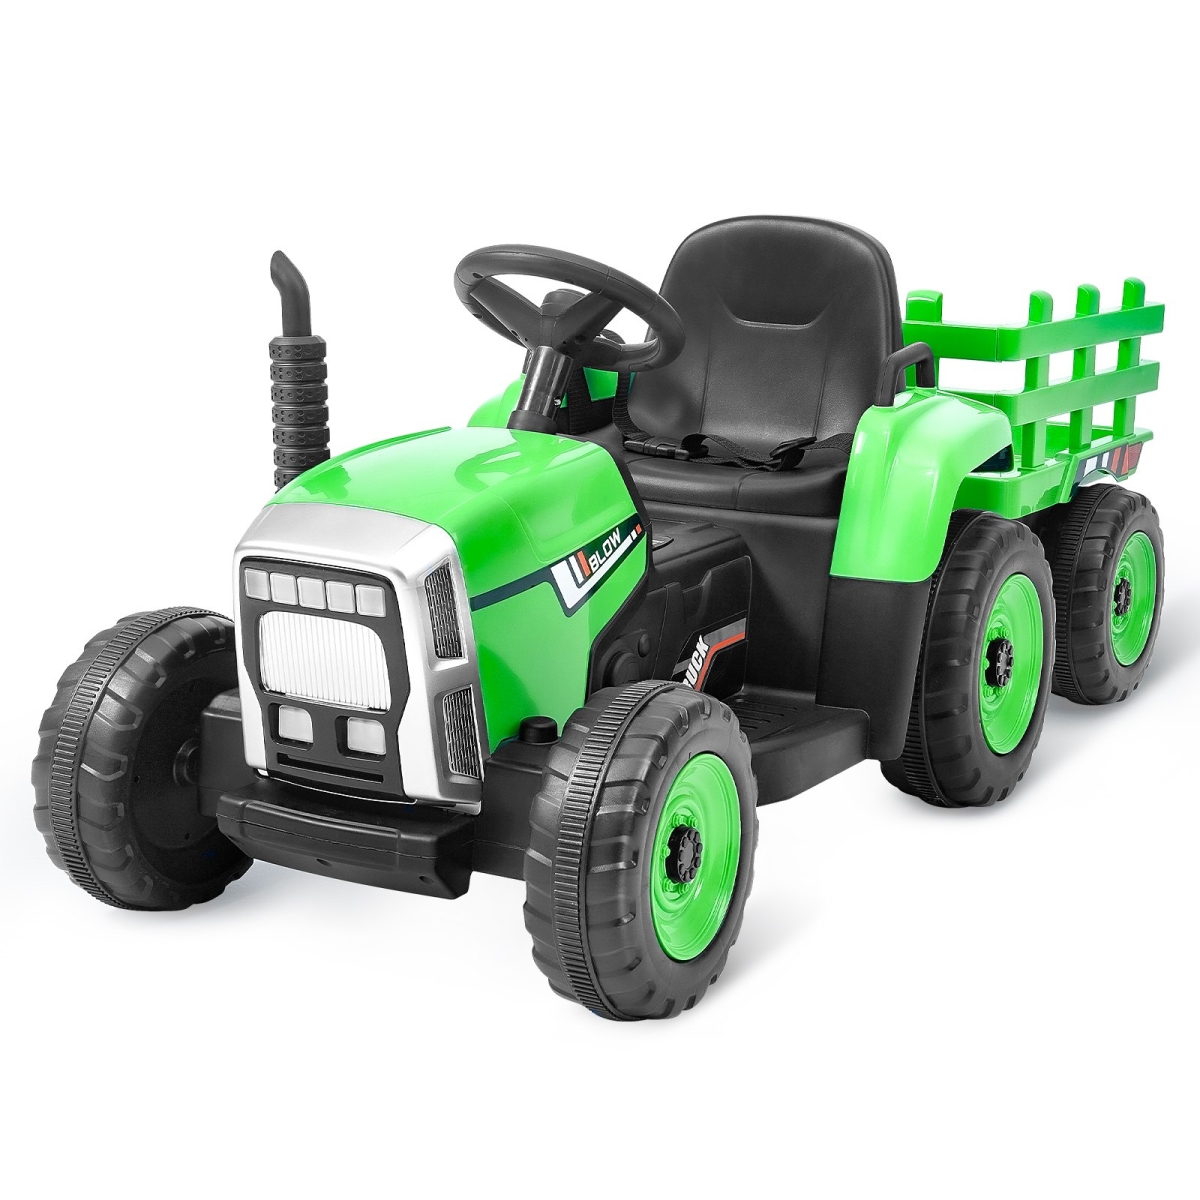 Picture of Vevor ETDDCTLJ0000O74UIV1 Kids Ride on Tractor 12V Electric Toy Tractor with Trailer Remote Control